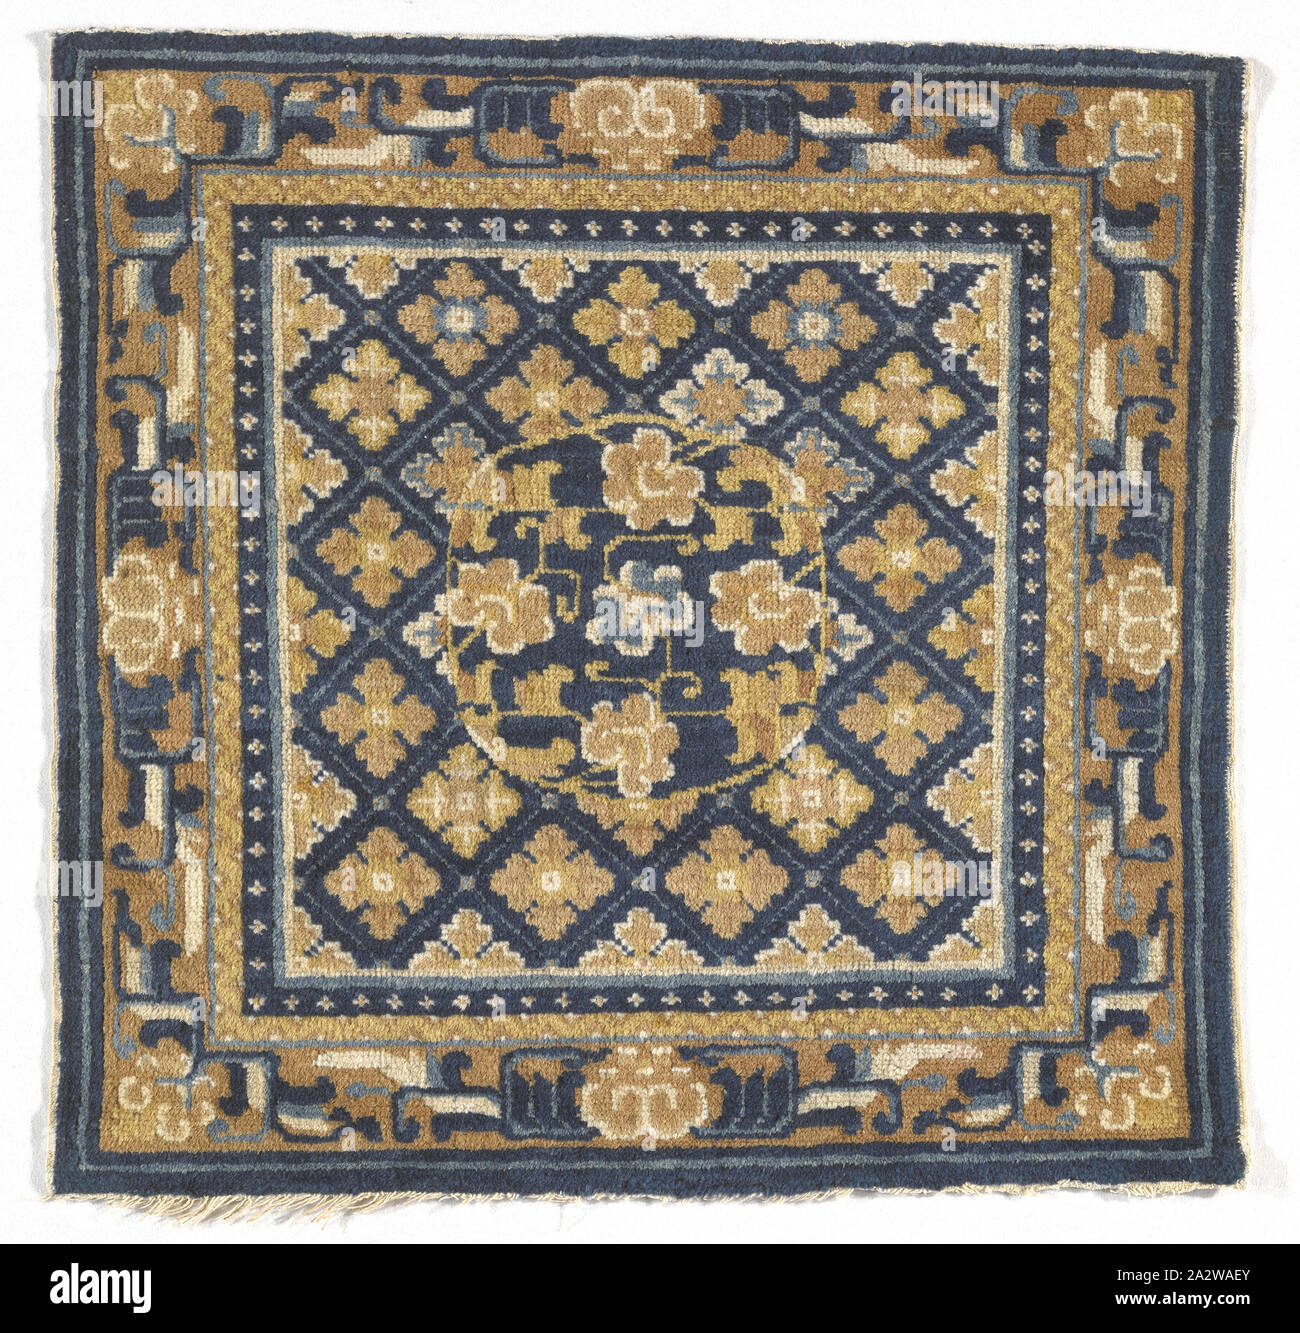 rug, 19th century, wool, cotton, 29 x 29-3/4 in., Textile and Fashion Arts Stock Photo